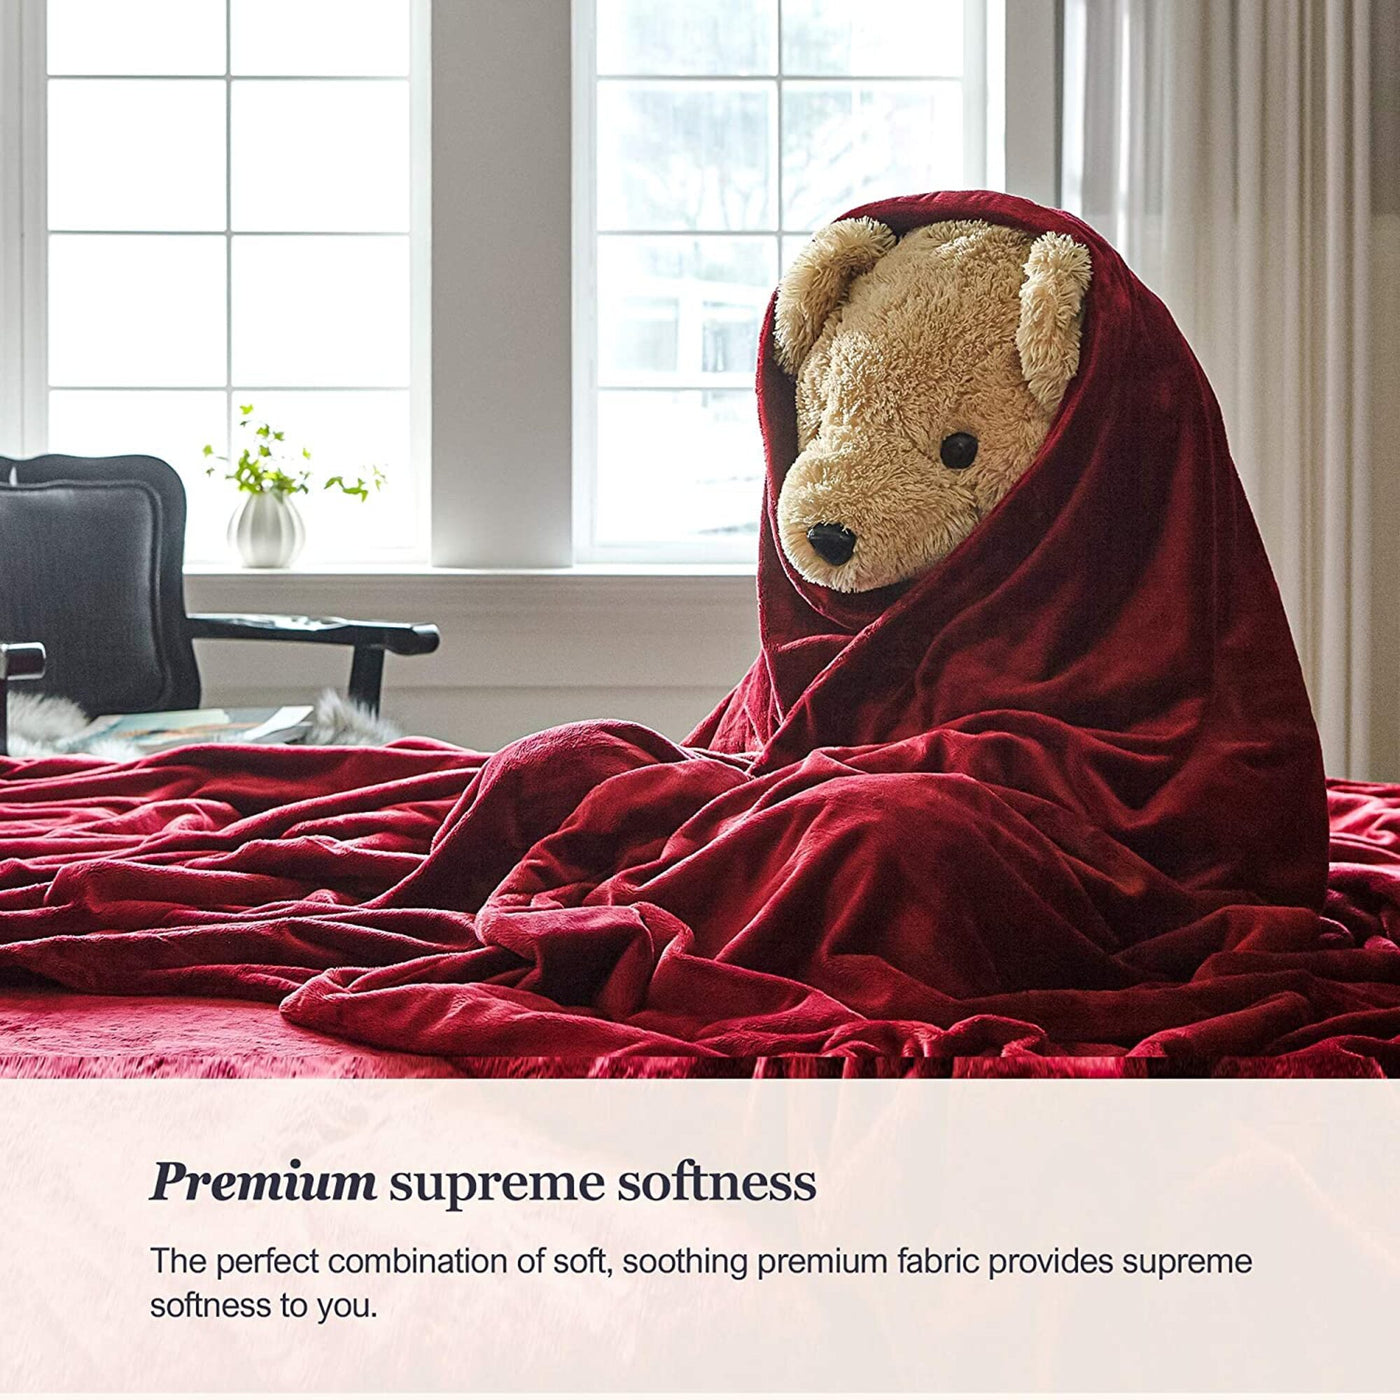 primebeau-premium-all-season-microfiber-fleece-bed-blanket-heavy-weight-and-double-sided-soft-and-cozy-king-size